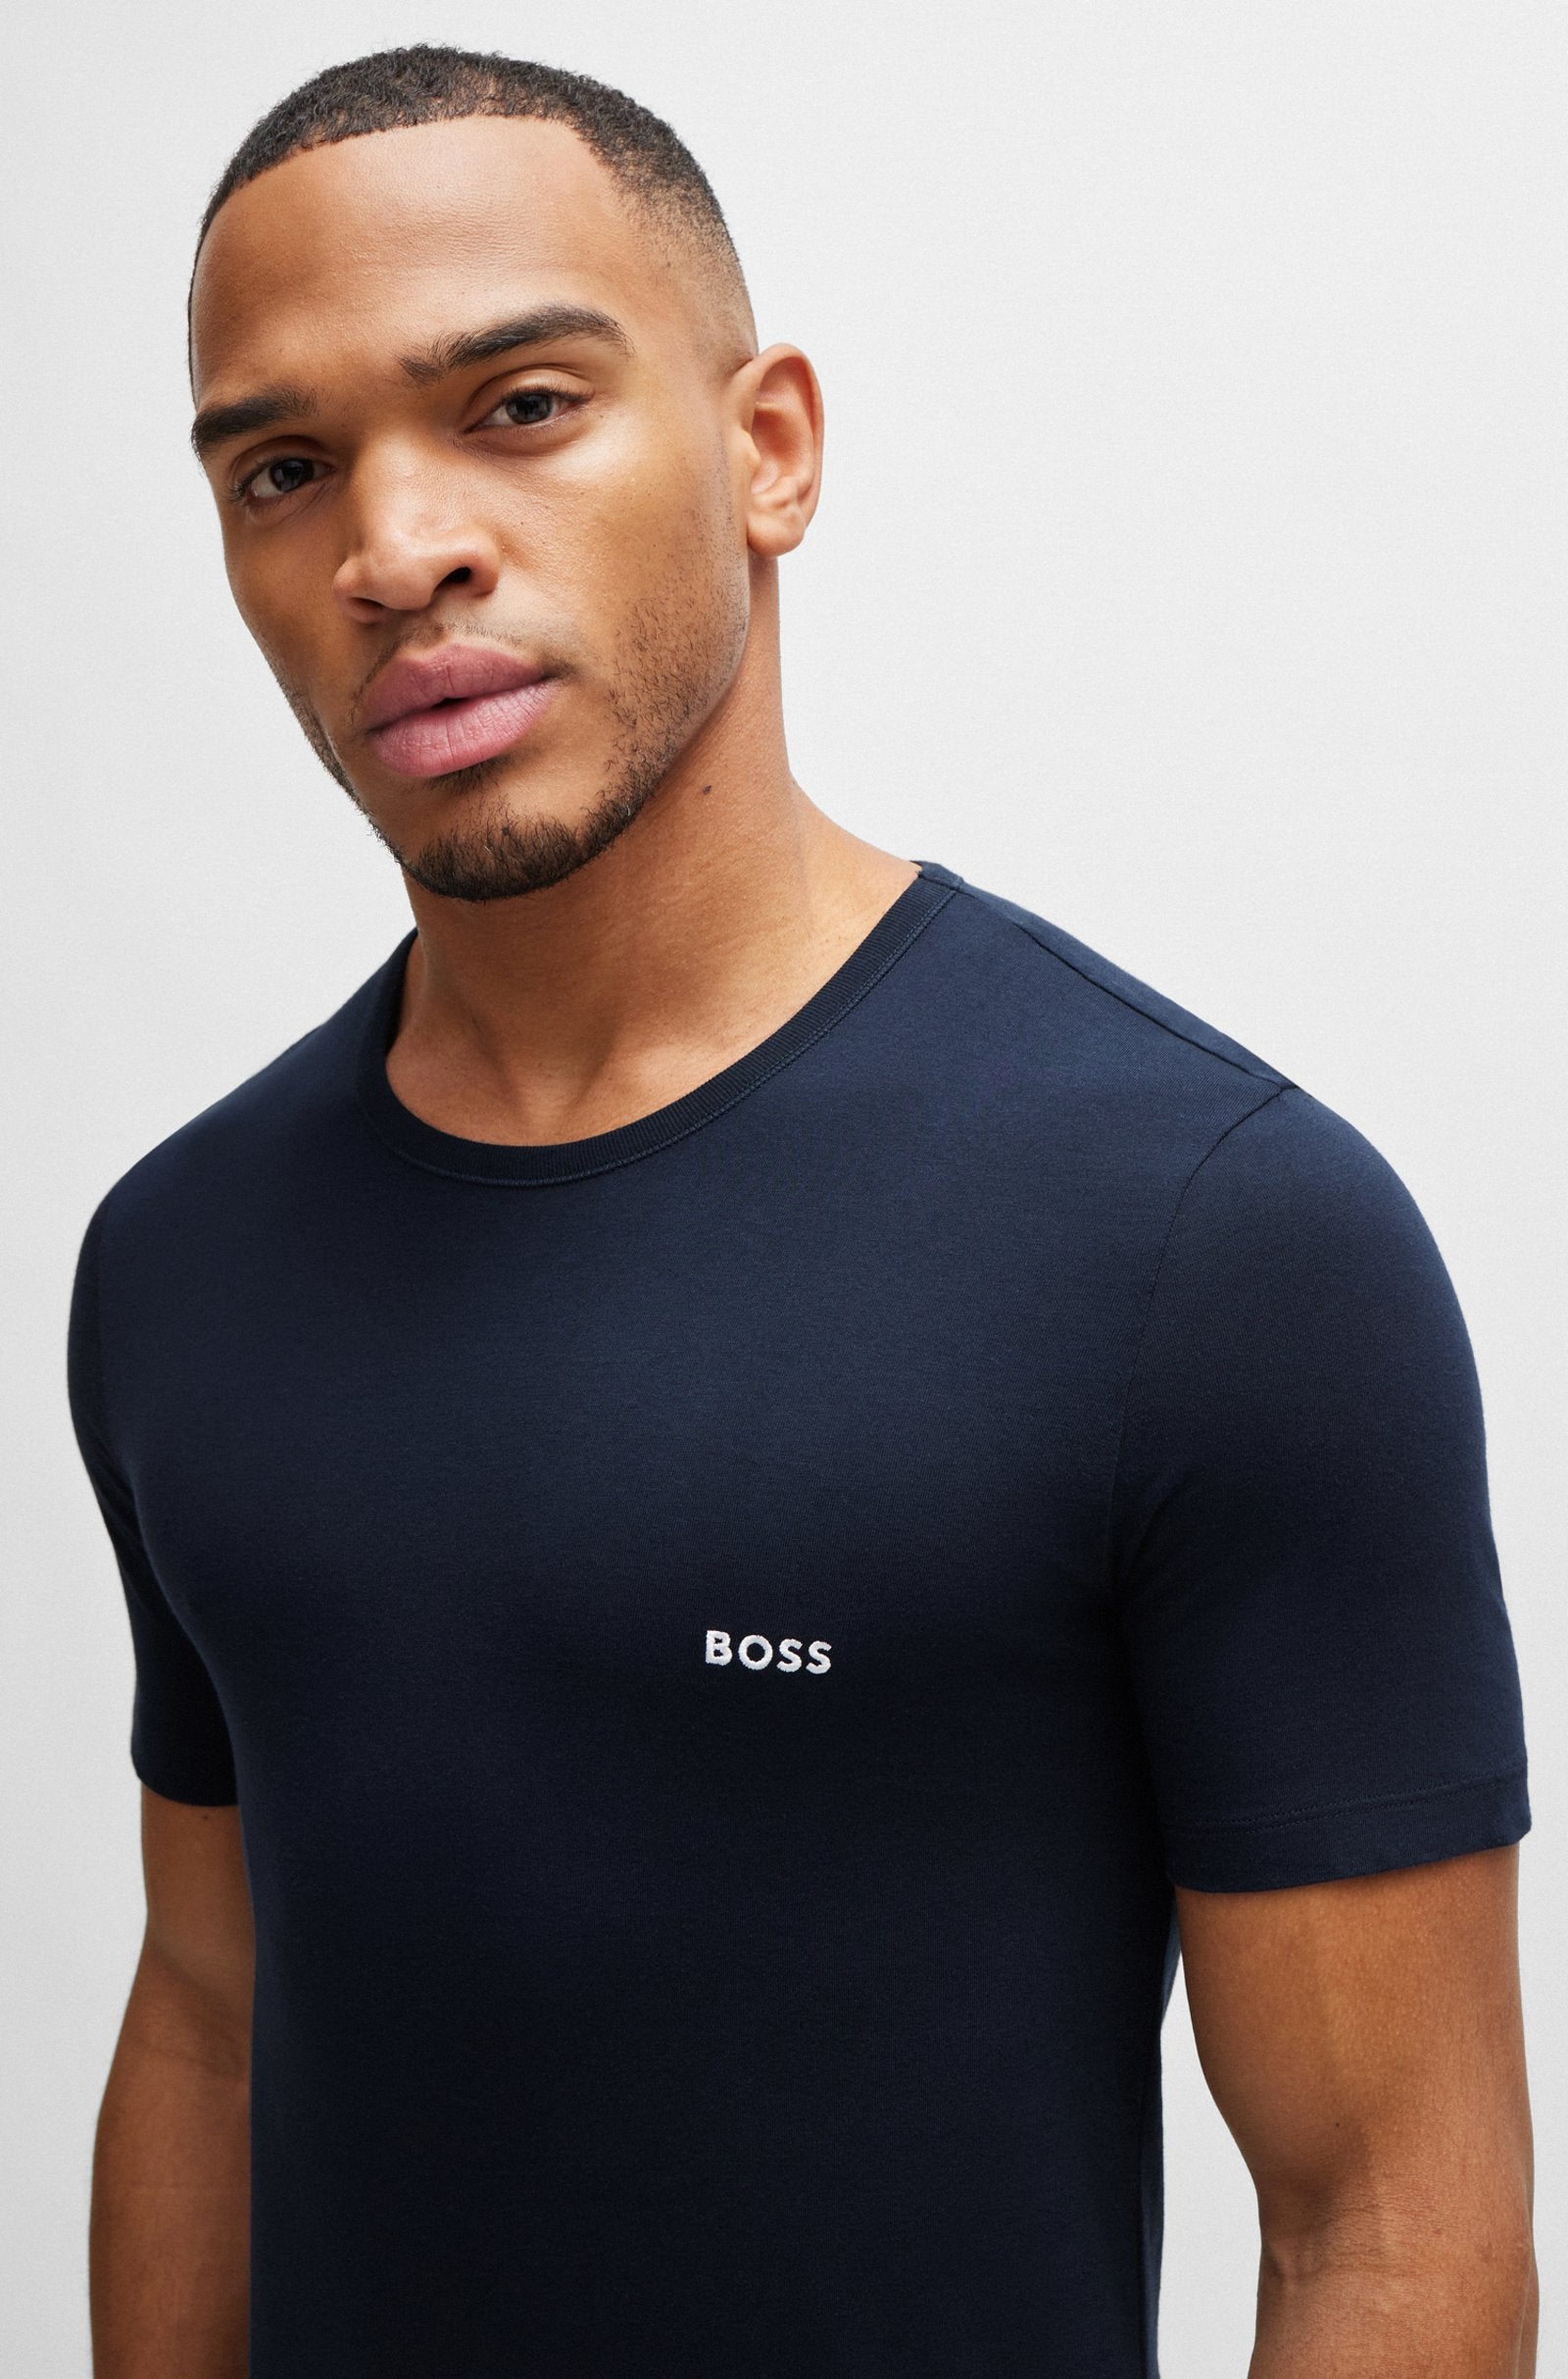 BOSS - 3-Pack Of Underwear T-Shirts In Cotton Jersey 50515002 982